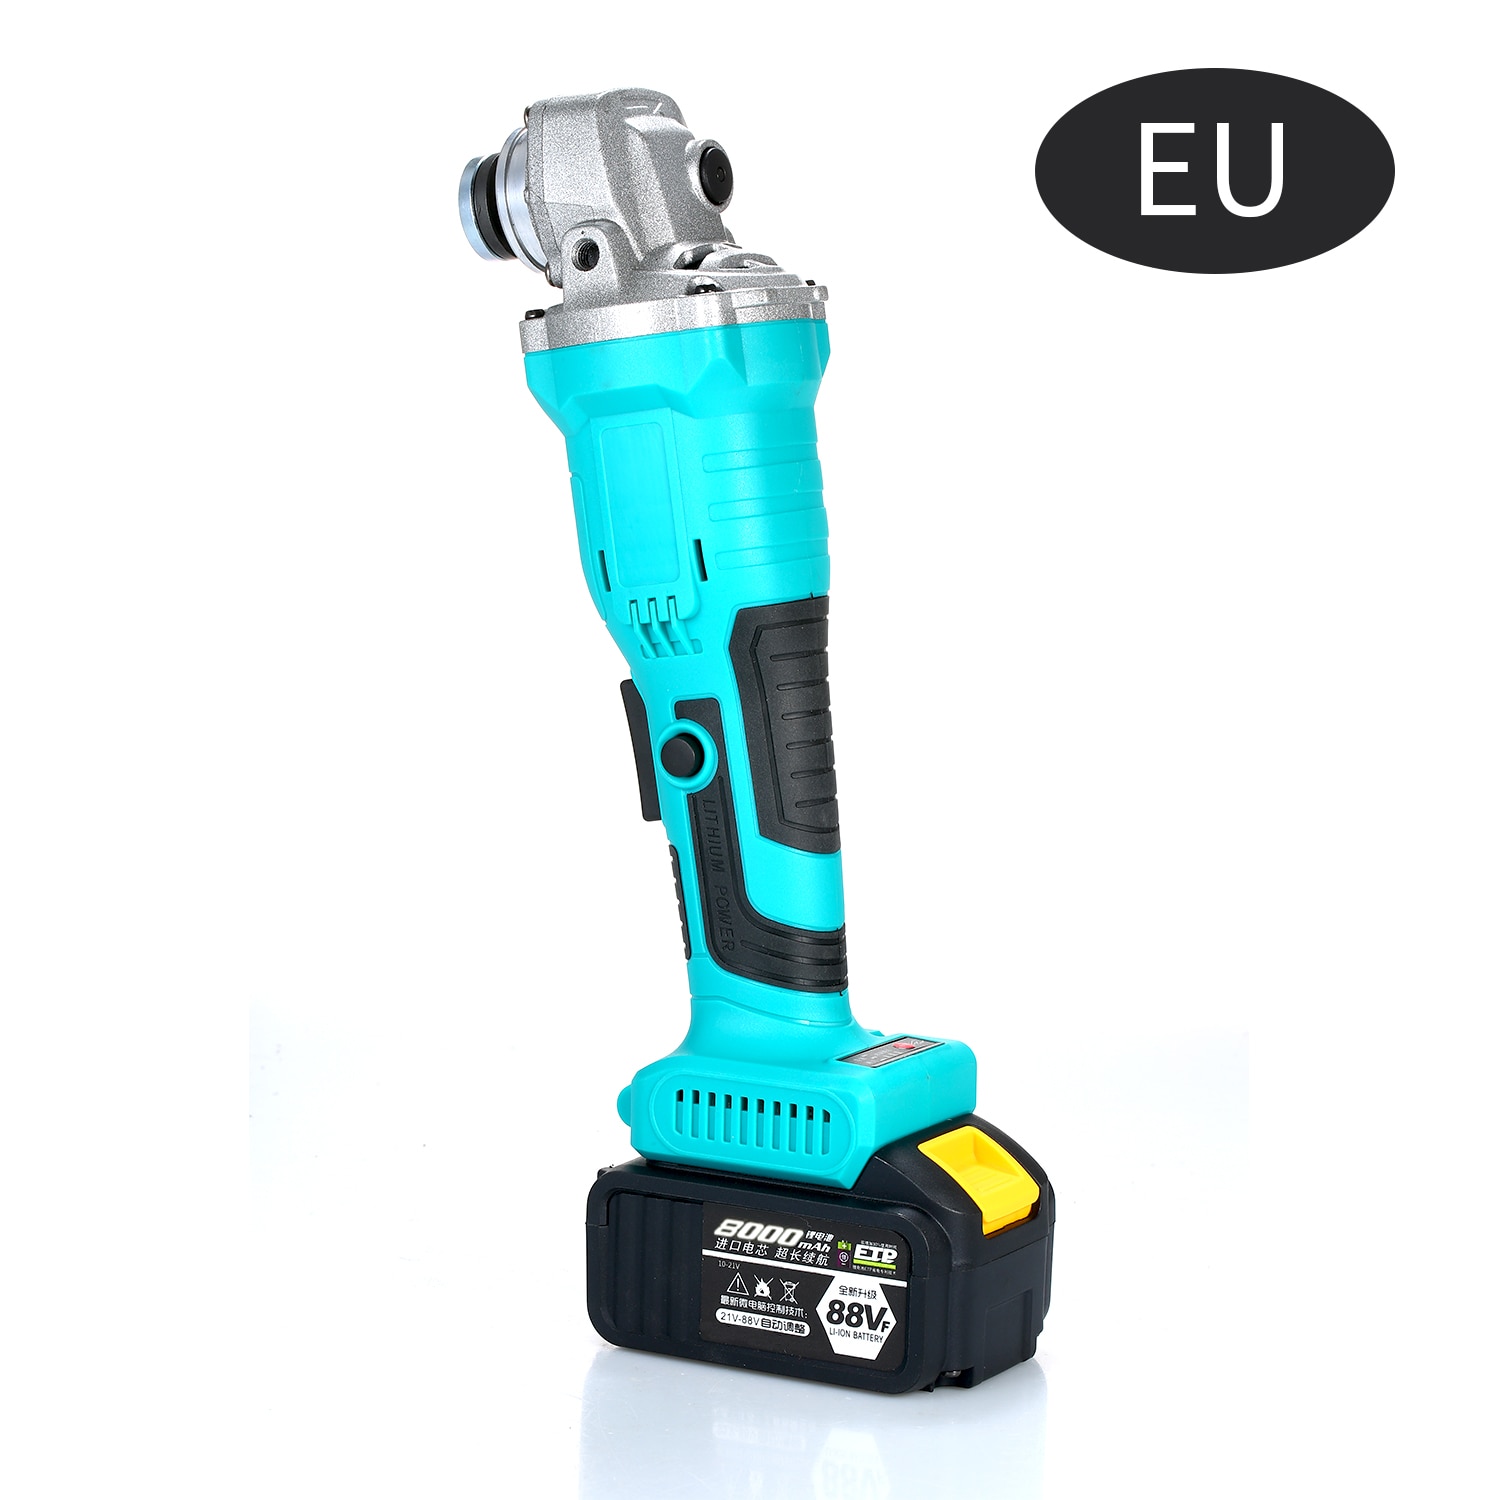 Angle Grinder Lithium Electric Brushless Rechargeable Electric Angle Grinder Household Polishing Machine Angular Grinder